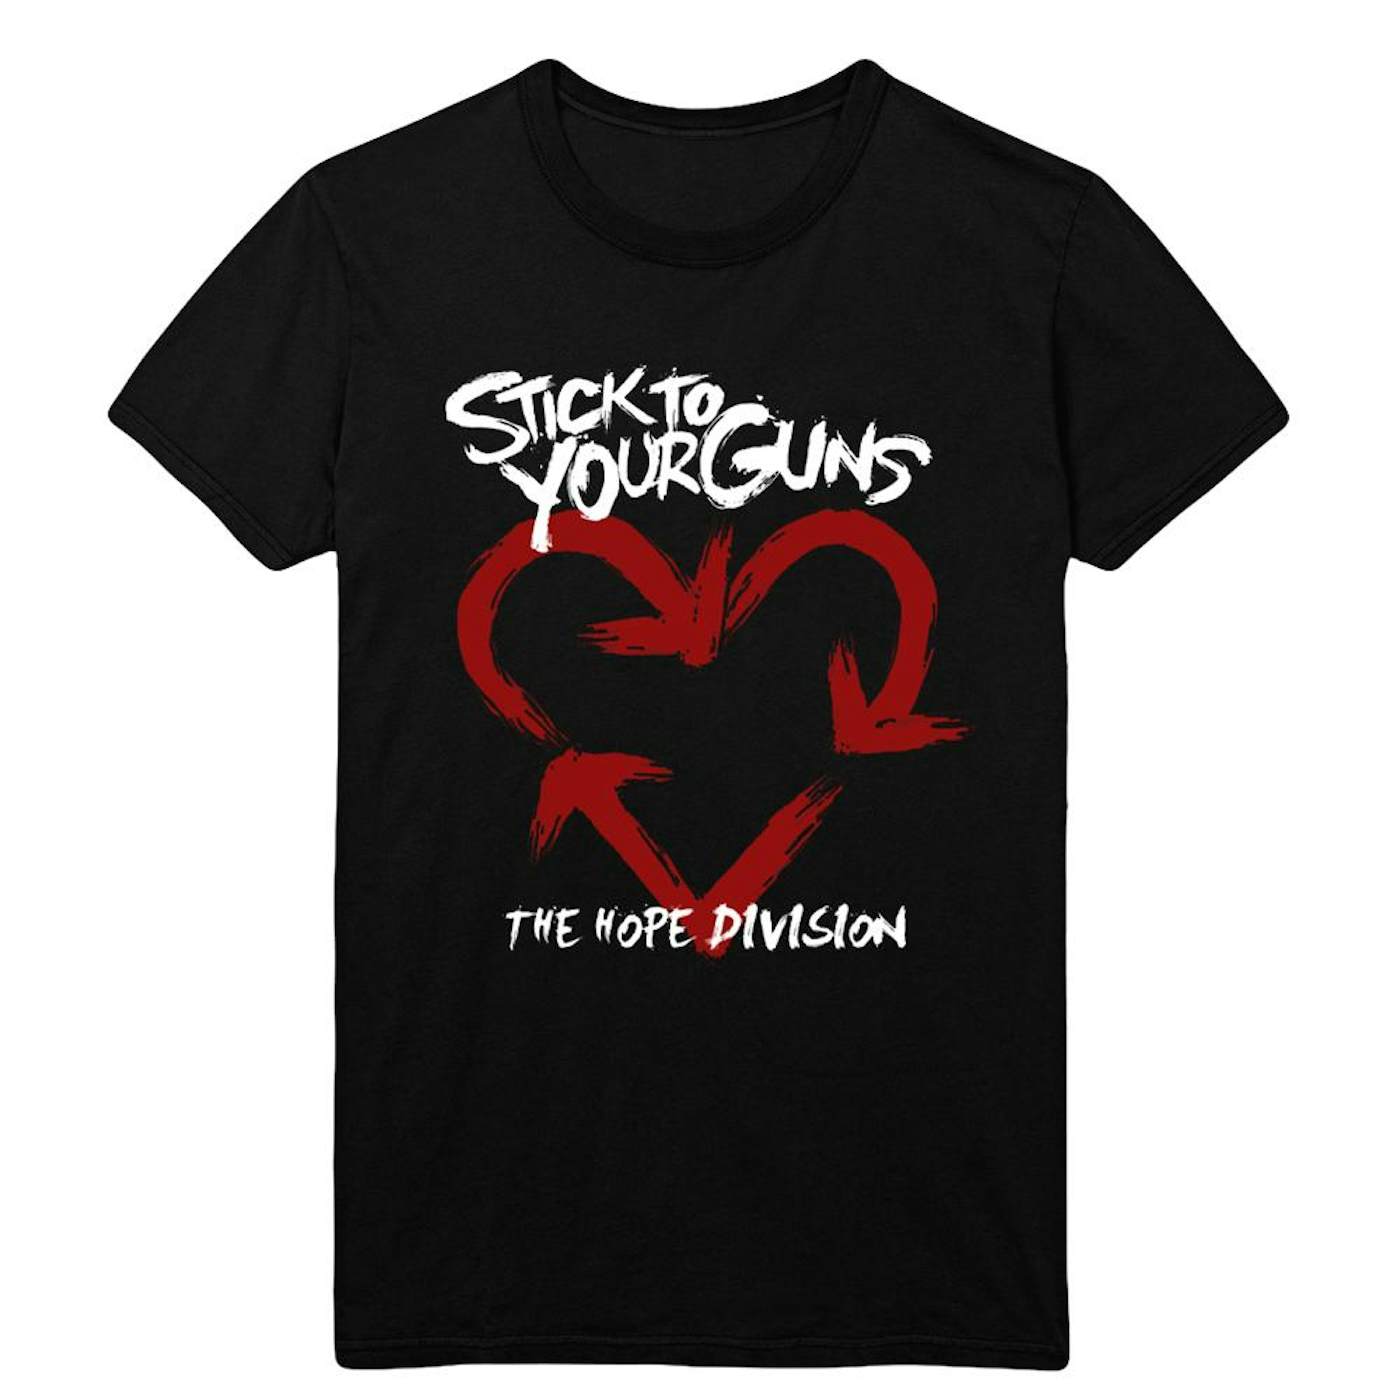 Stick To Your Guns - The Hope Division T-Shirt (Black)